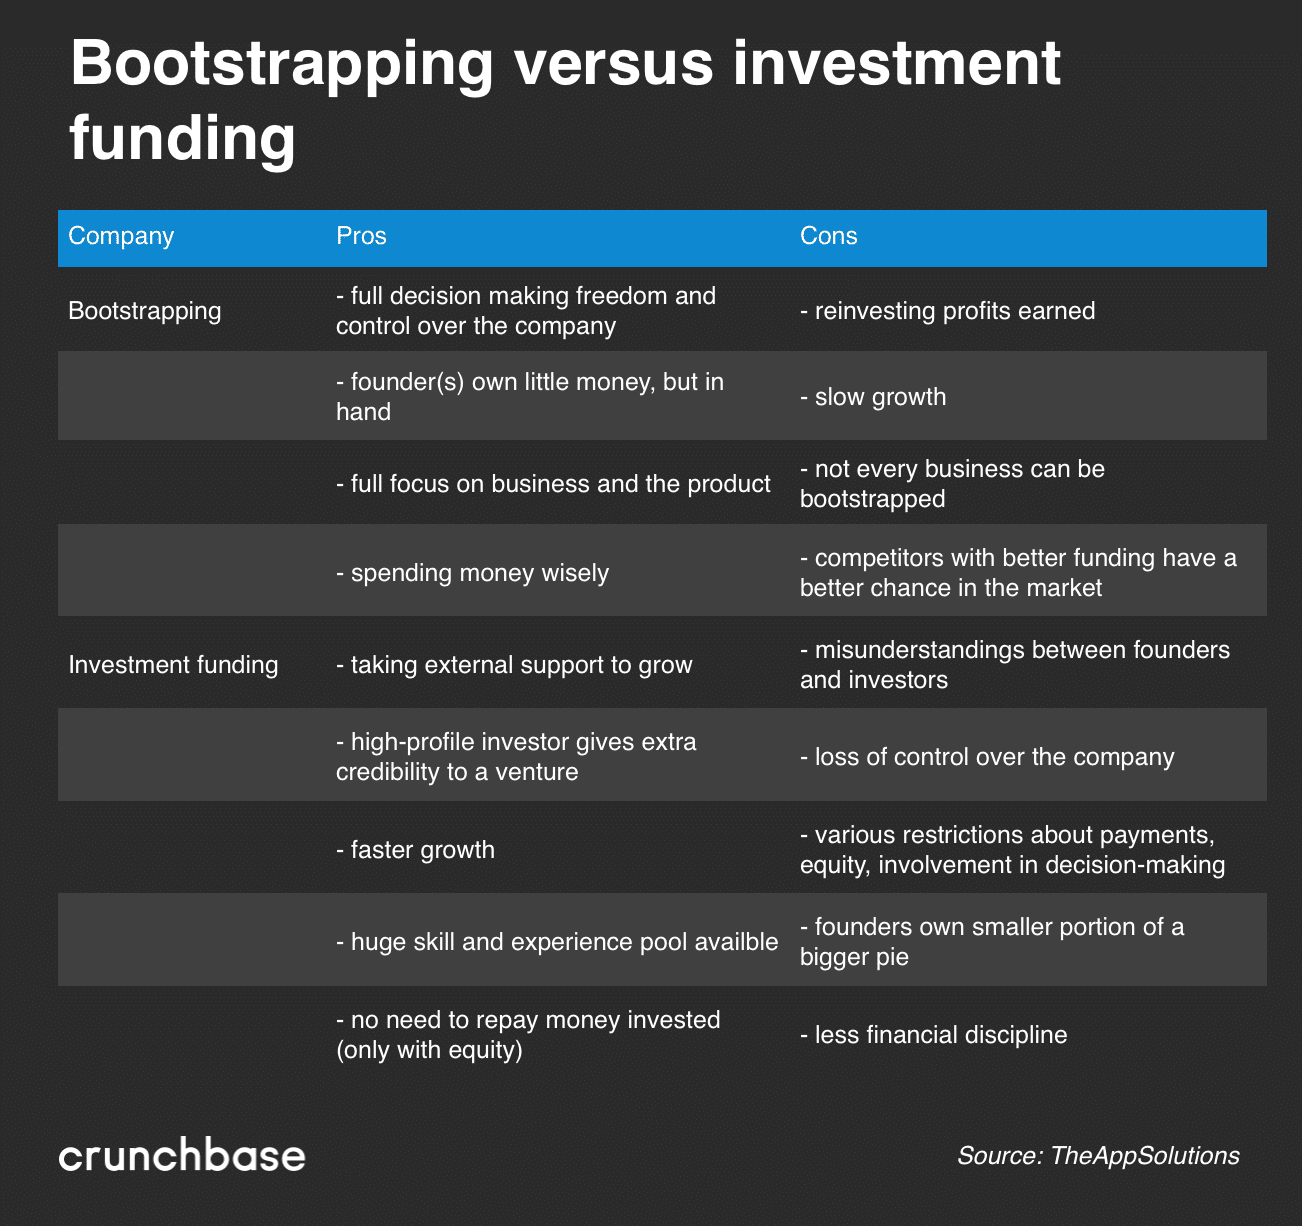 Bootstrapping versus investment funding